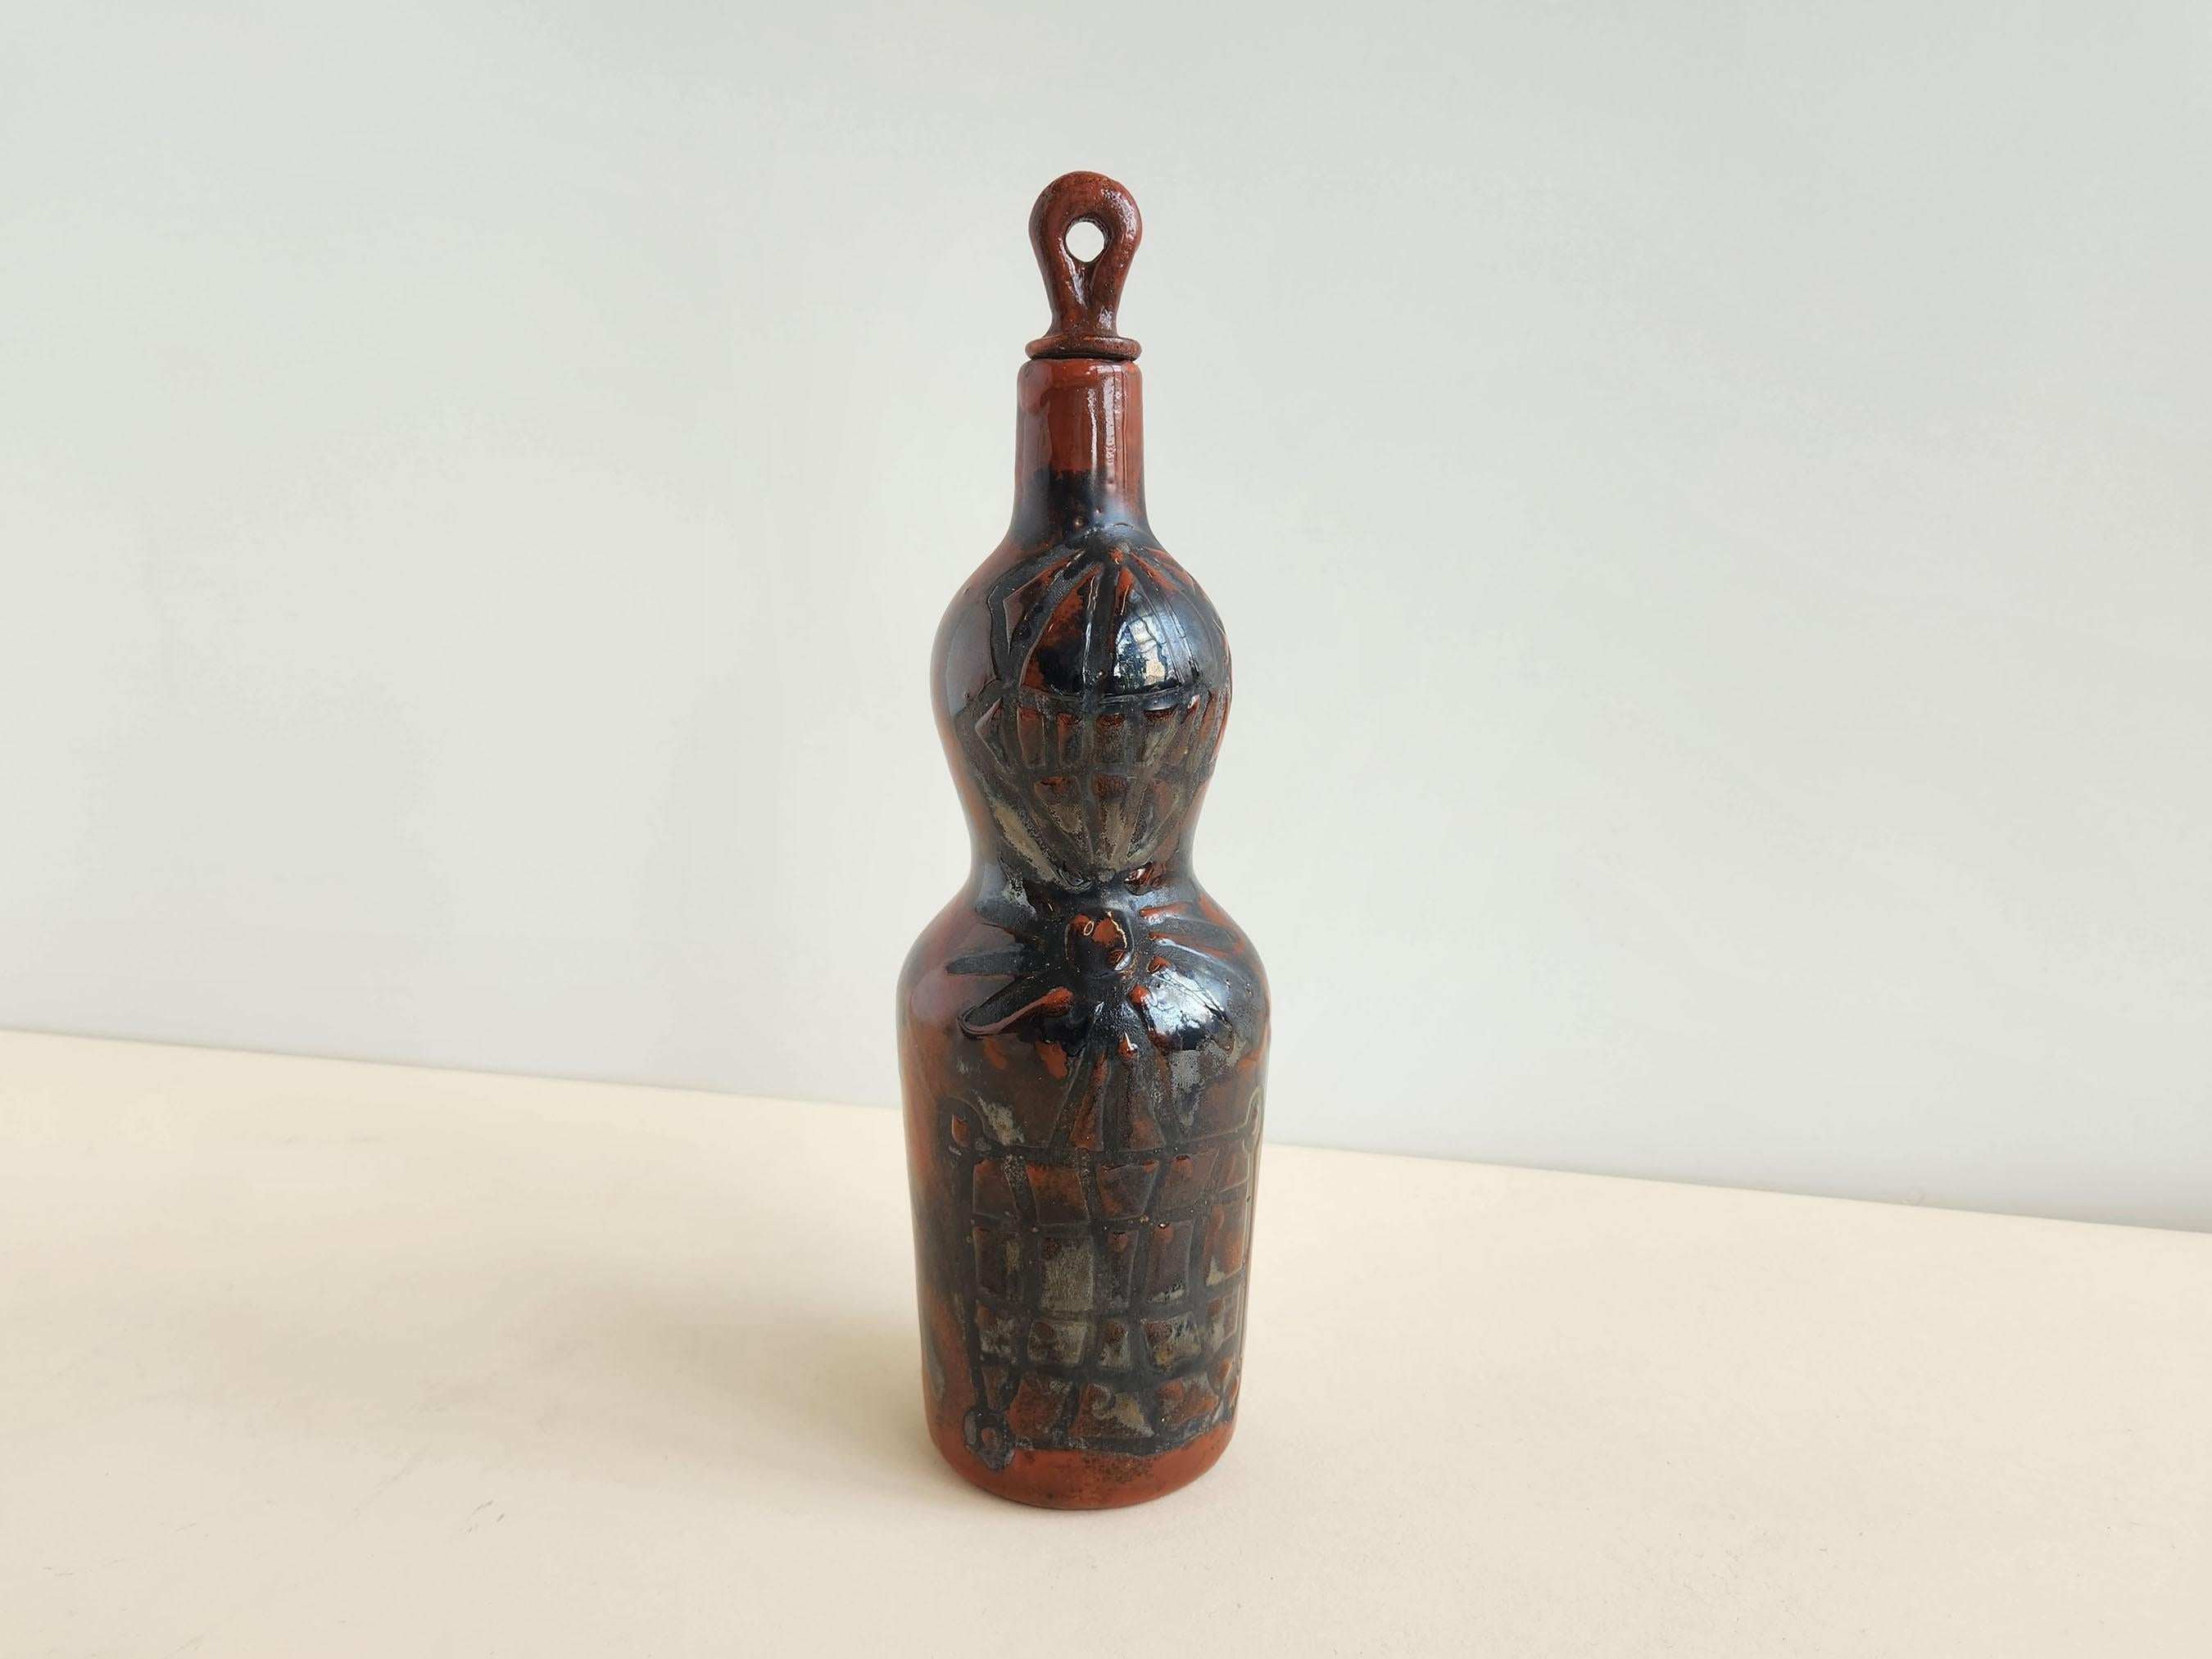 Vintage ceramic decorative flask signed by Roger Capron - Vallauris, France

Roger Capron was in influential French ceramicist, known for his tiled tables and his use of recurring motifs such as stylized branches and geometrical suns.   He was born